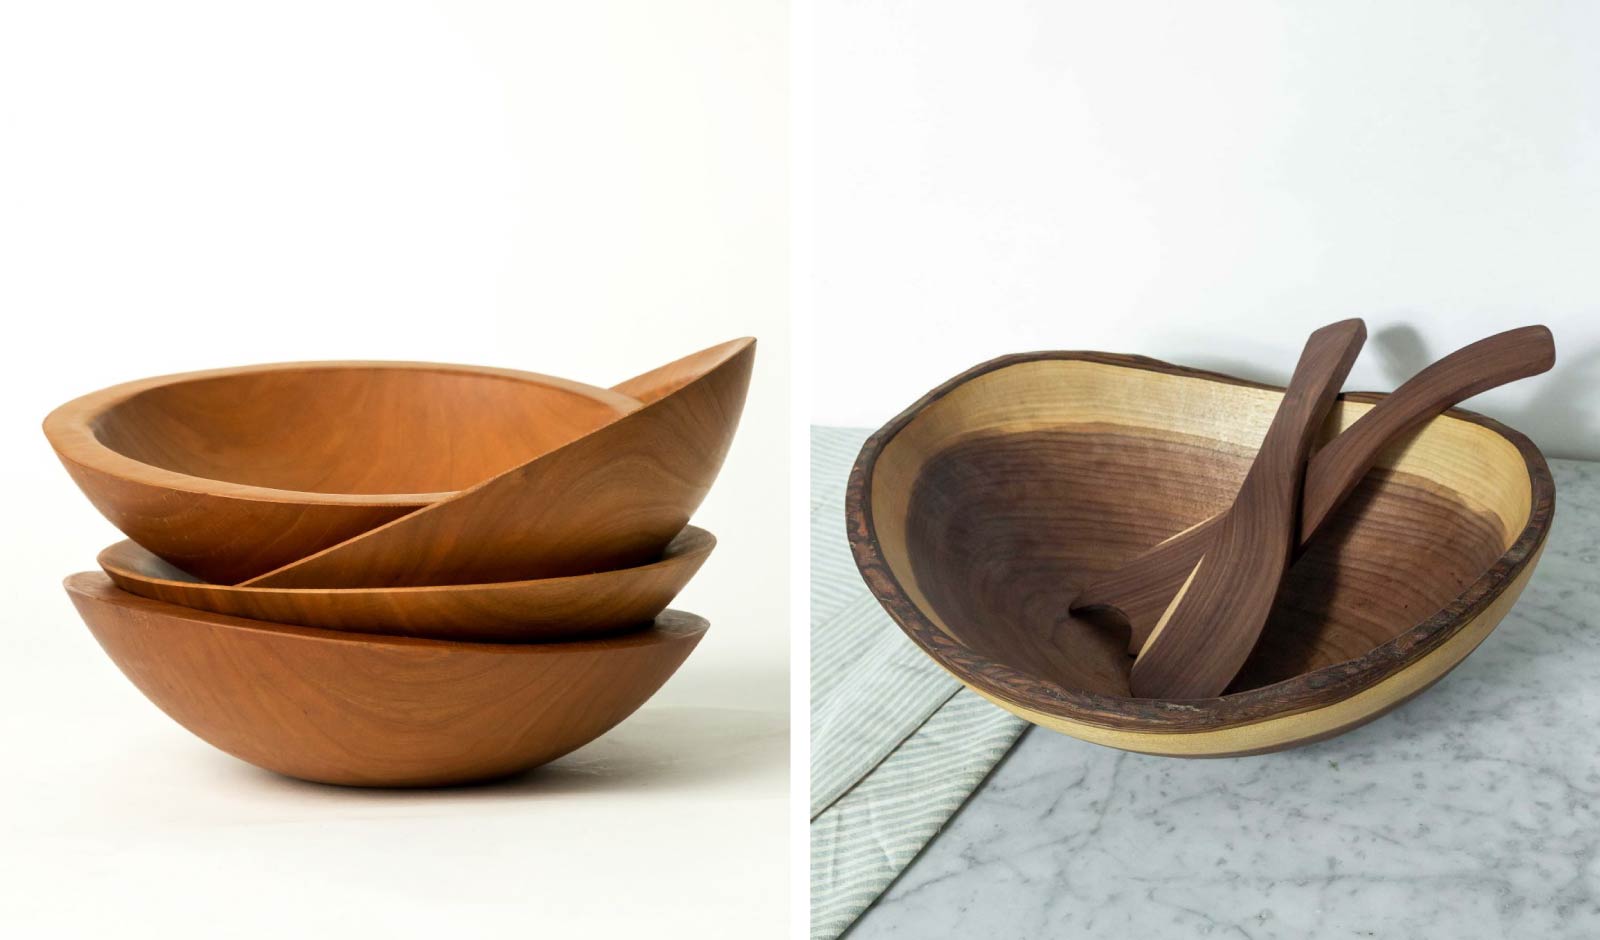 A stack of round cherry bowls and a live edge black walnut bowl, made by Spencer Peterman